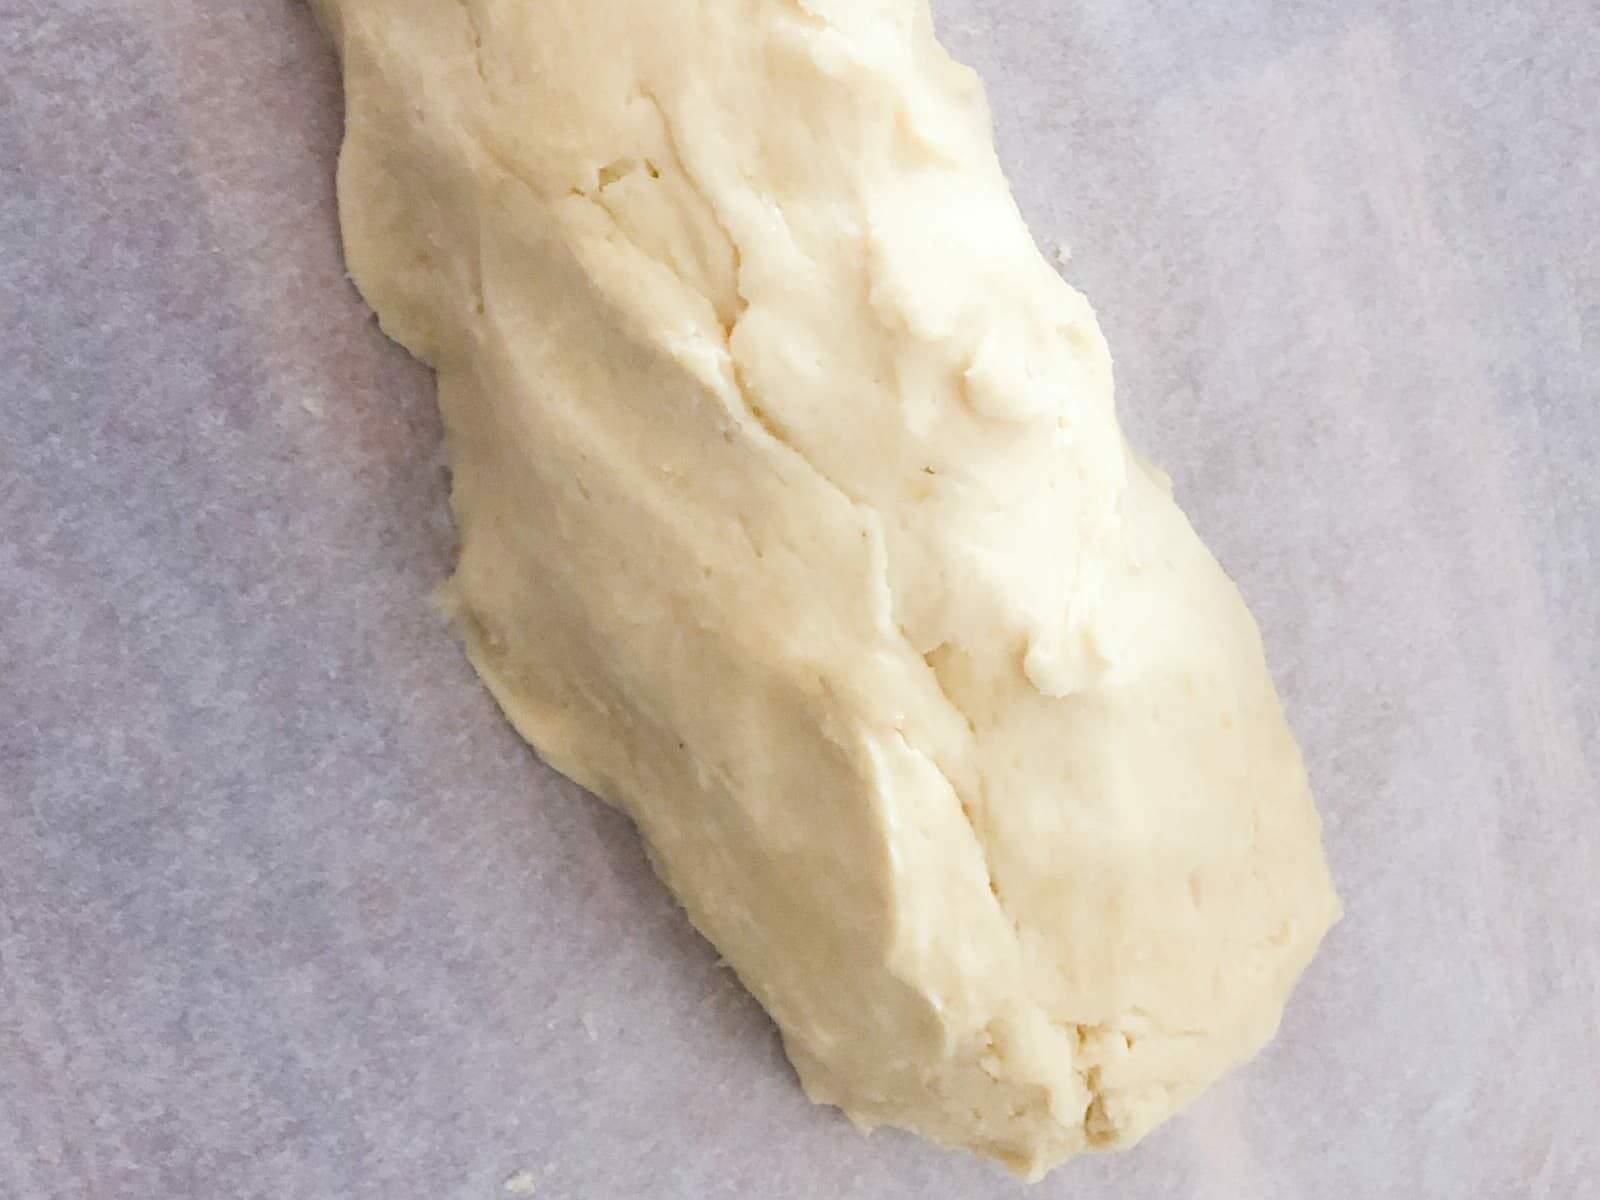 Lemon butter biscuit dough ready to roll and chill